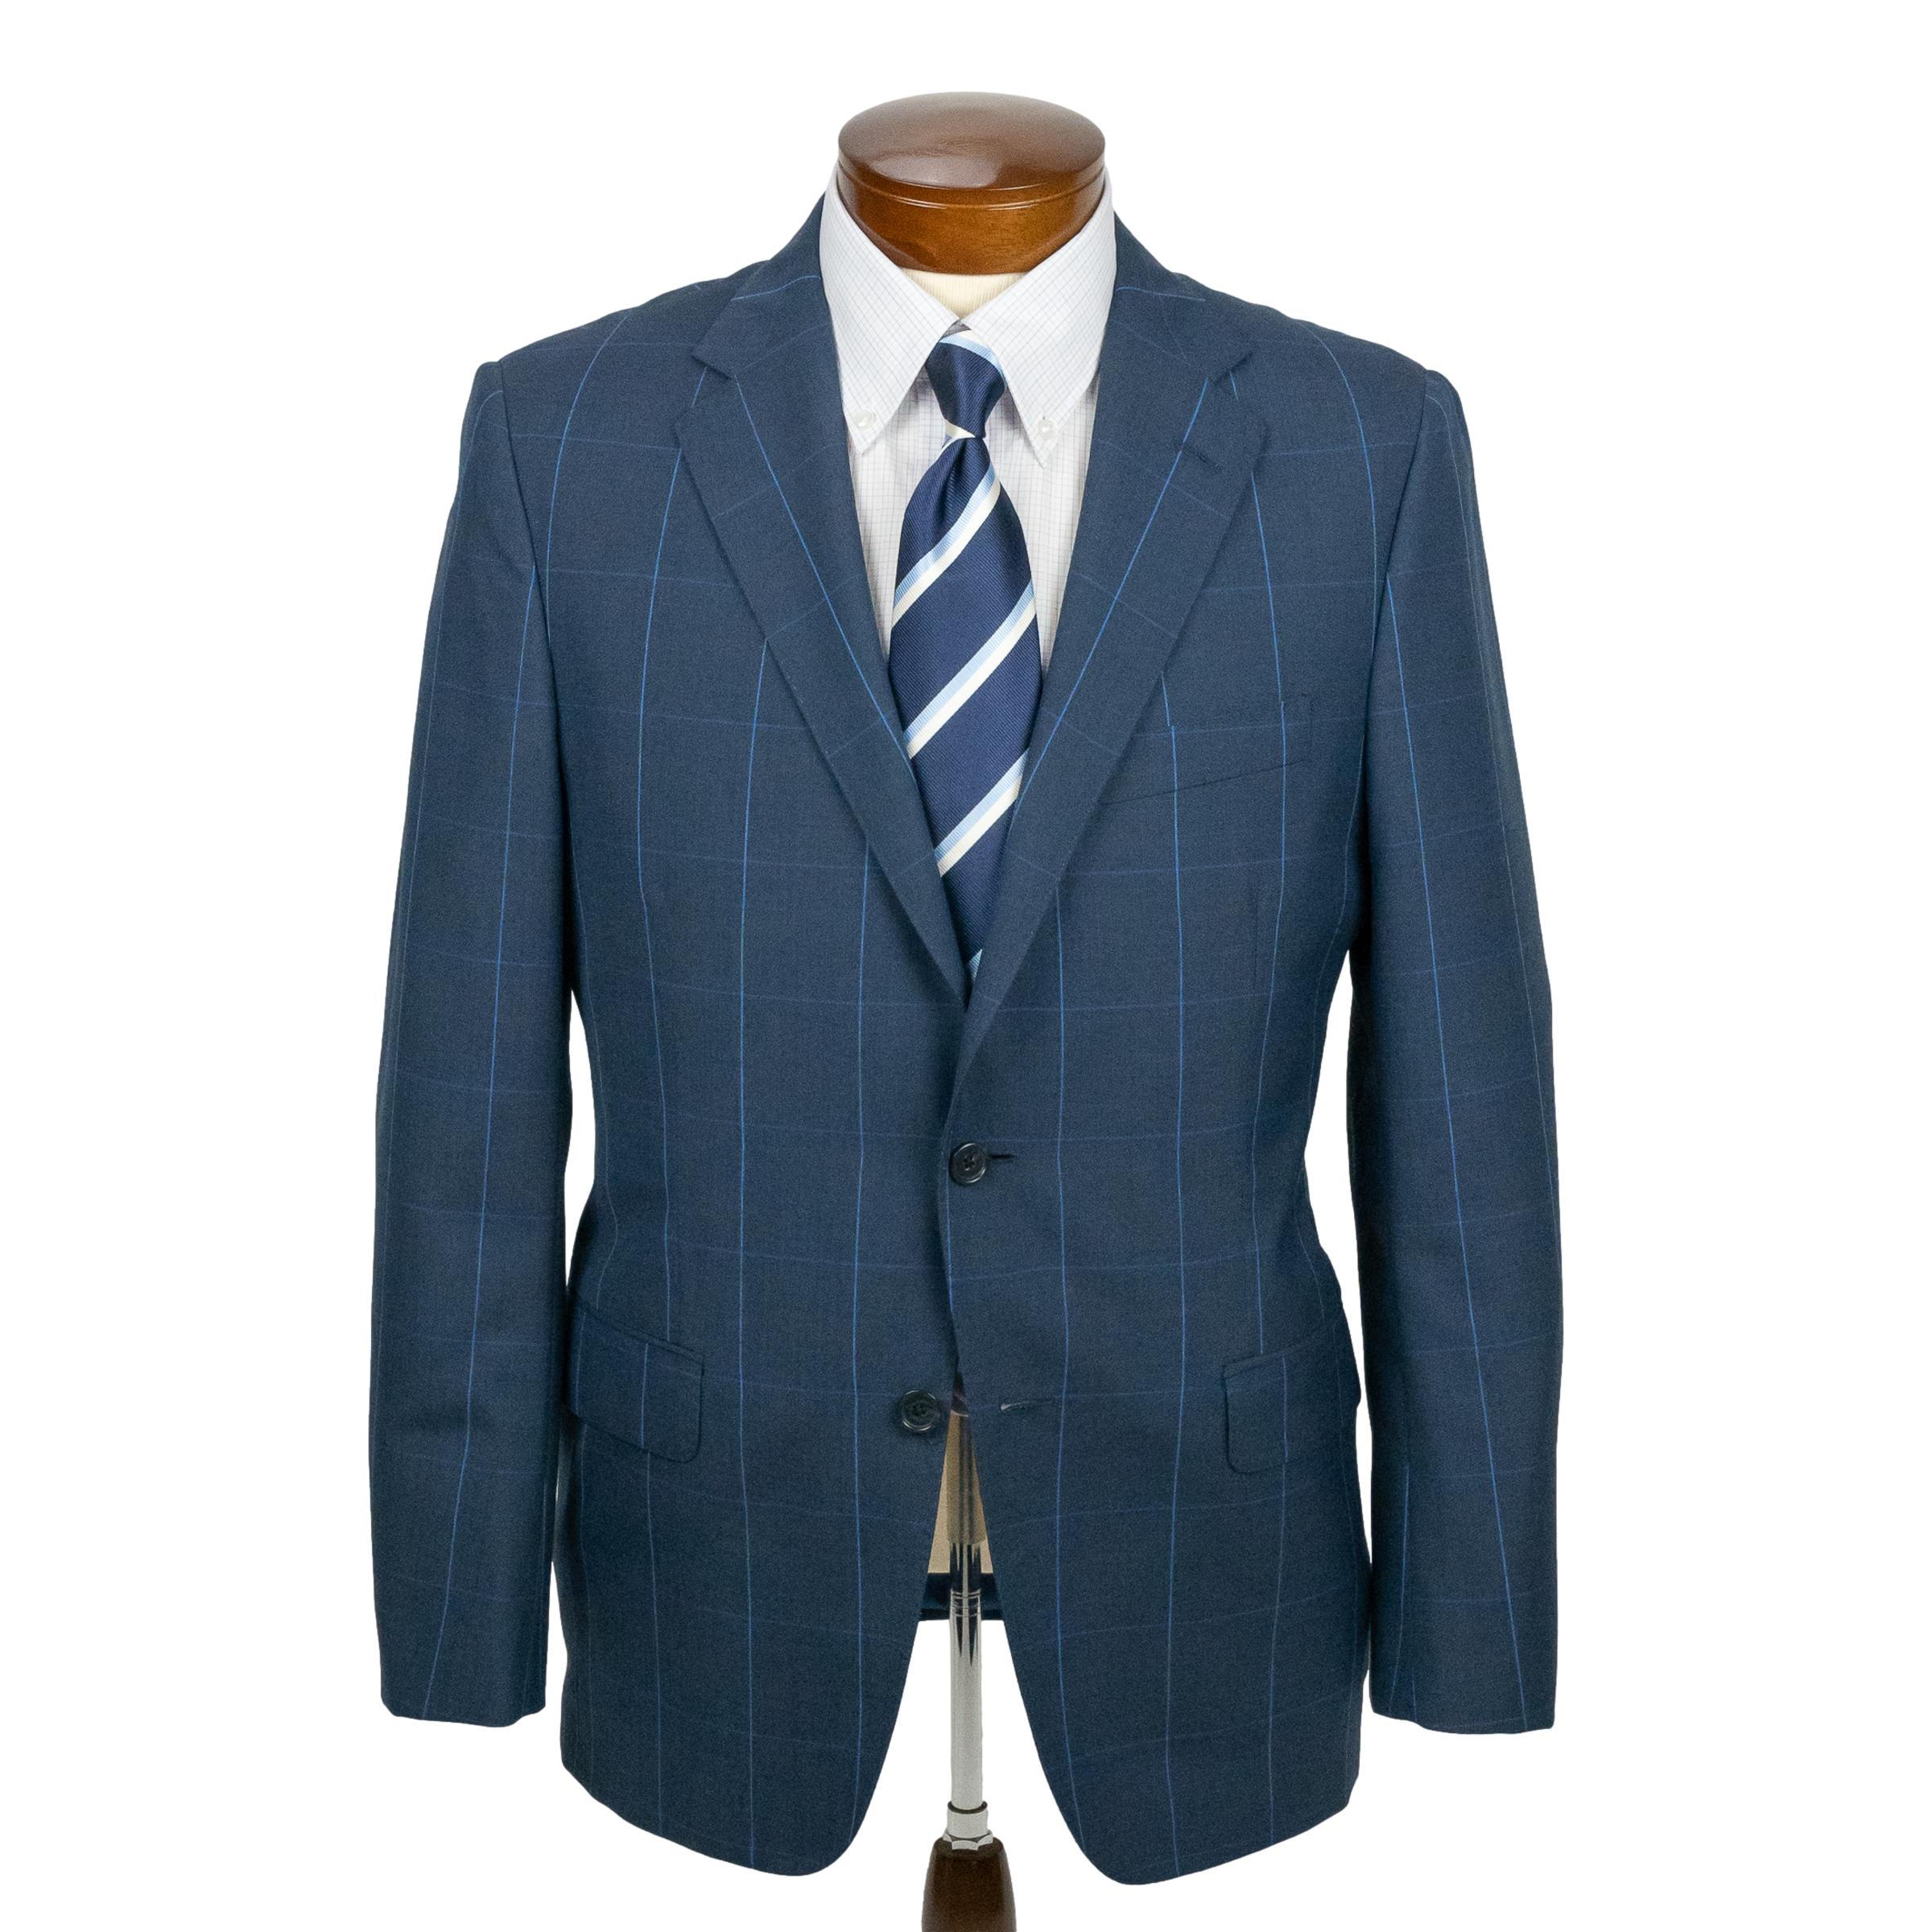 Navy with Light Blue Windowpane Wool Suit